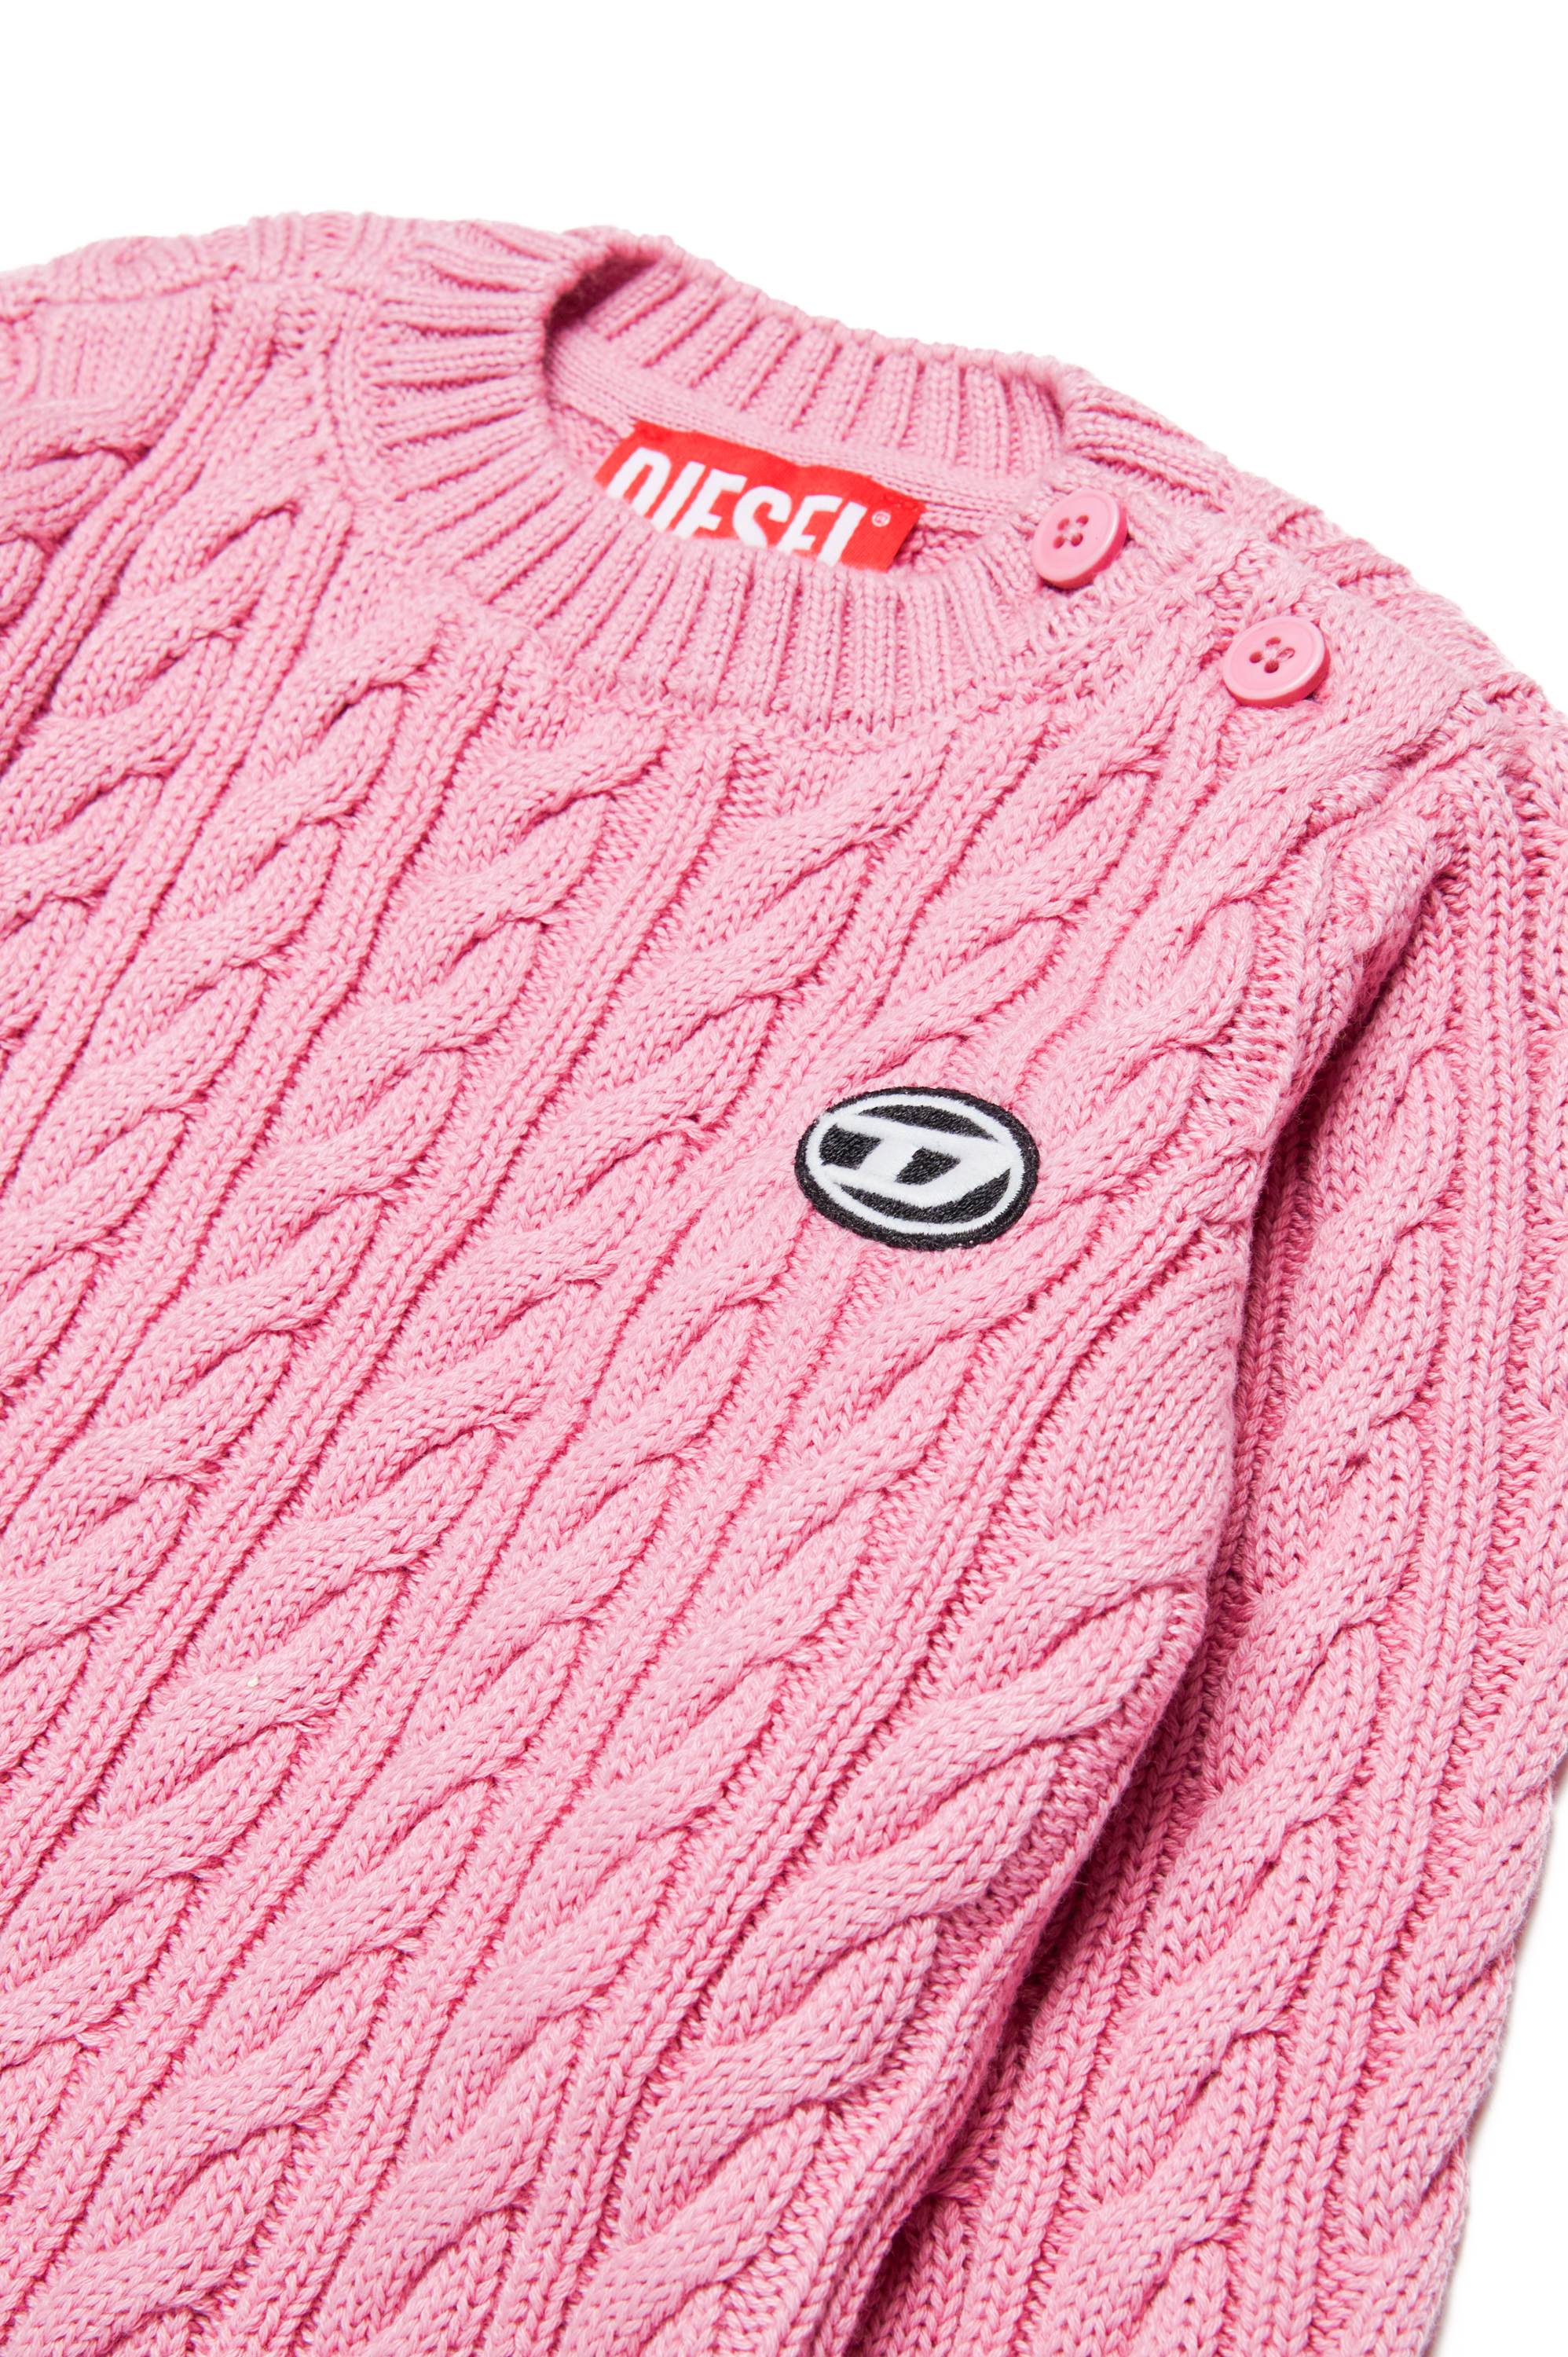 Diesel - KBAMBYB, Unisex Cotton jumper with Oval D patch in Pink - Image 3